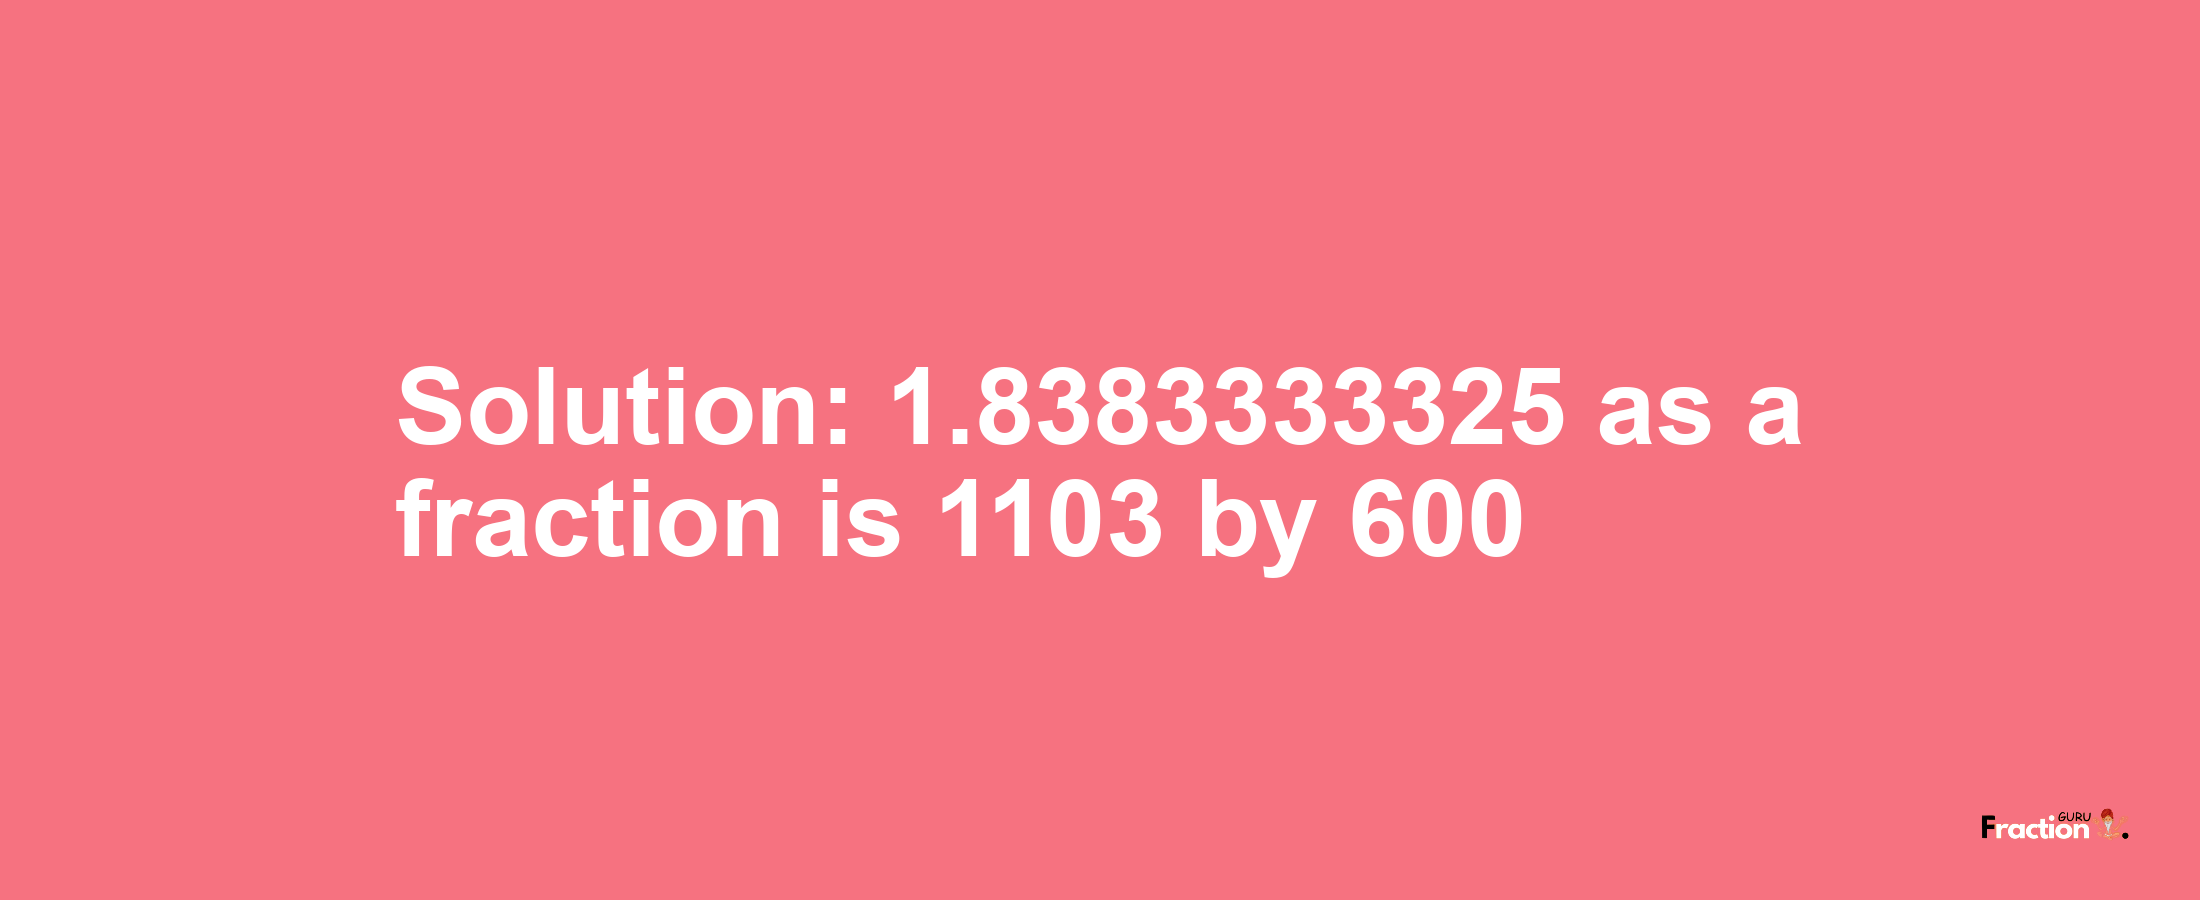 Solution:1.8383333325 as a fraction is 1103/600